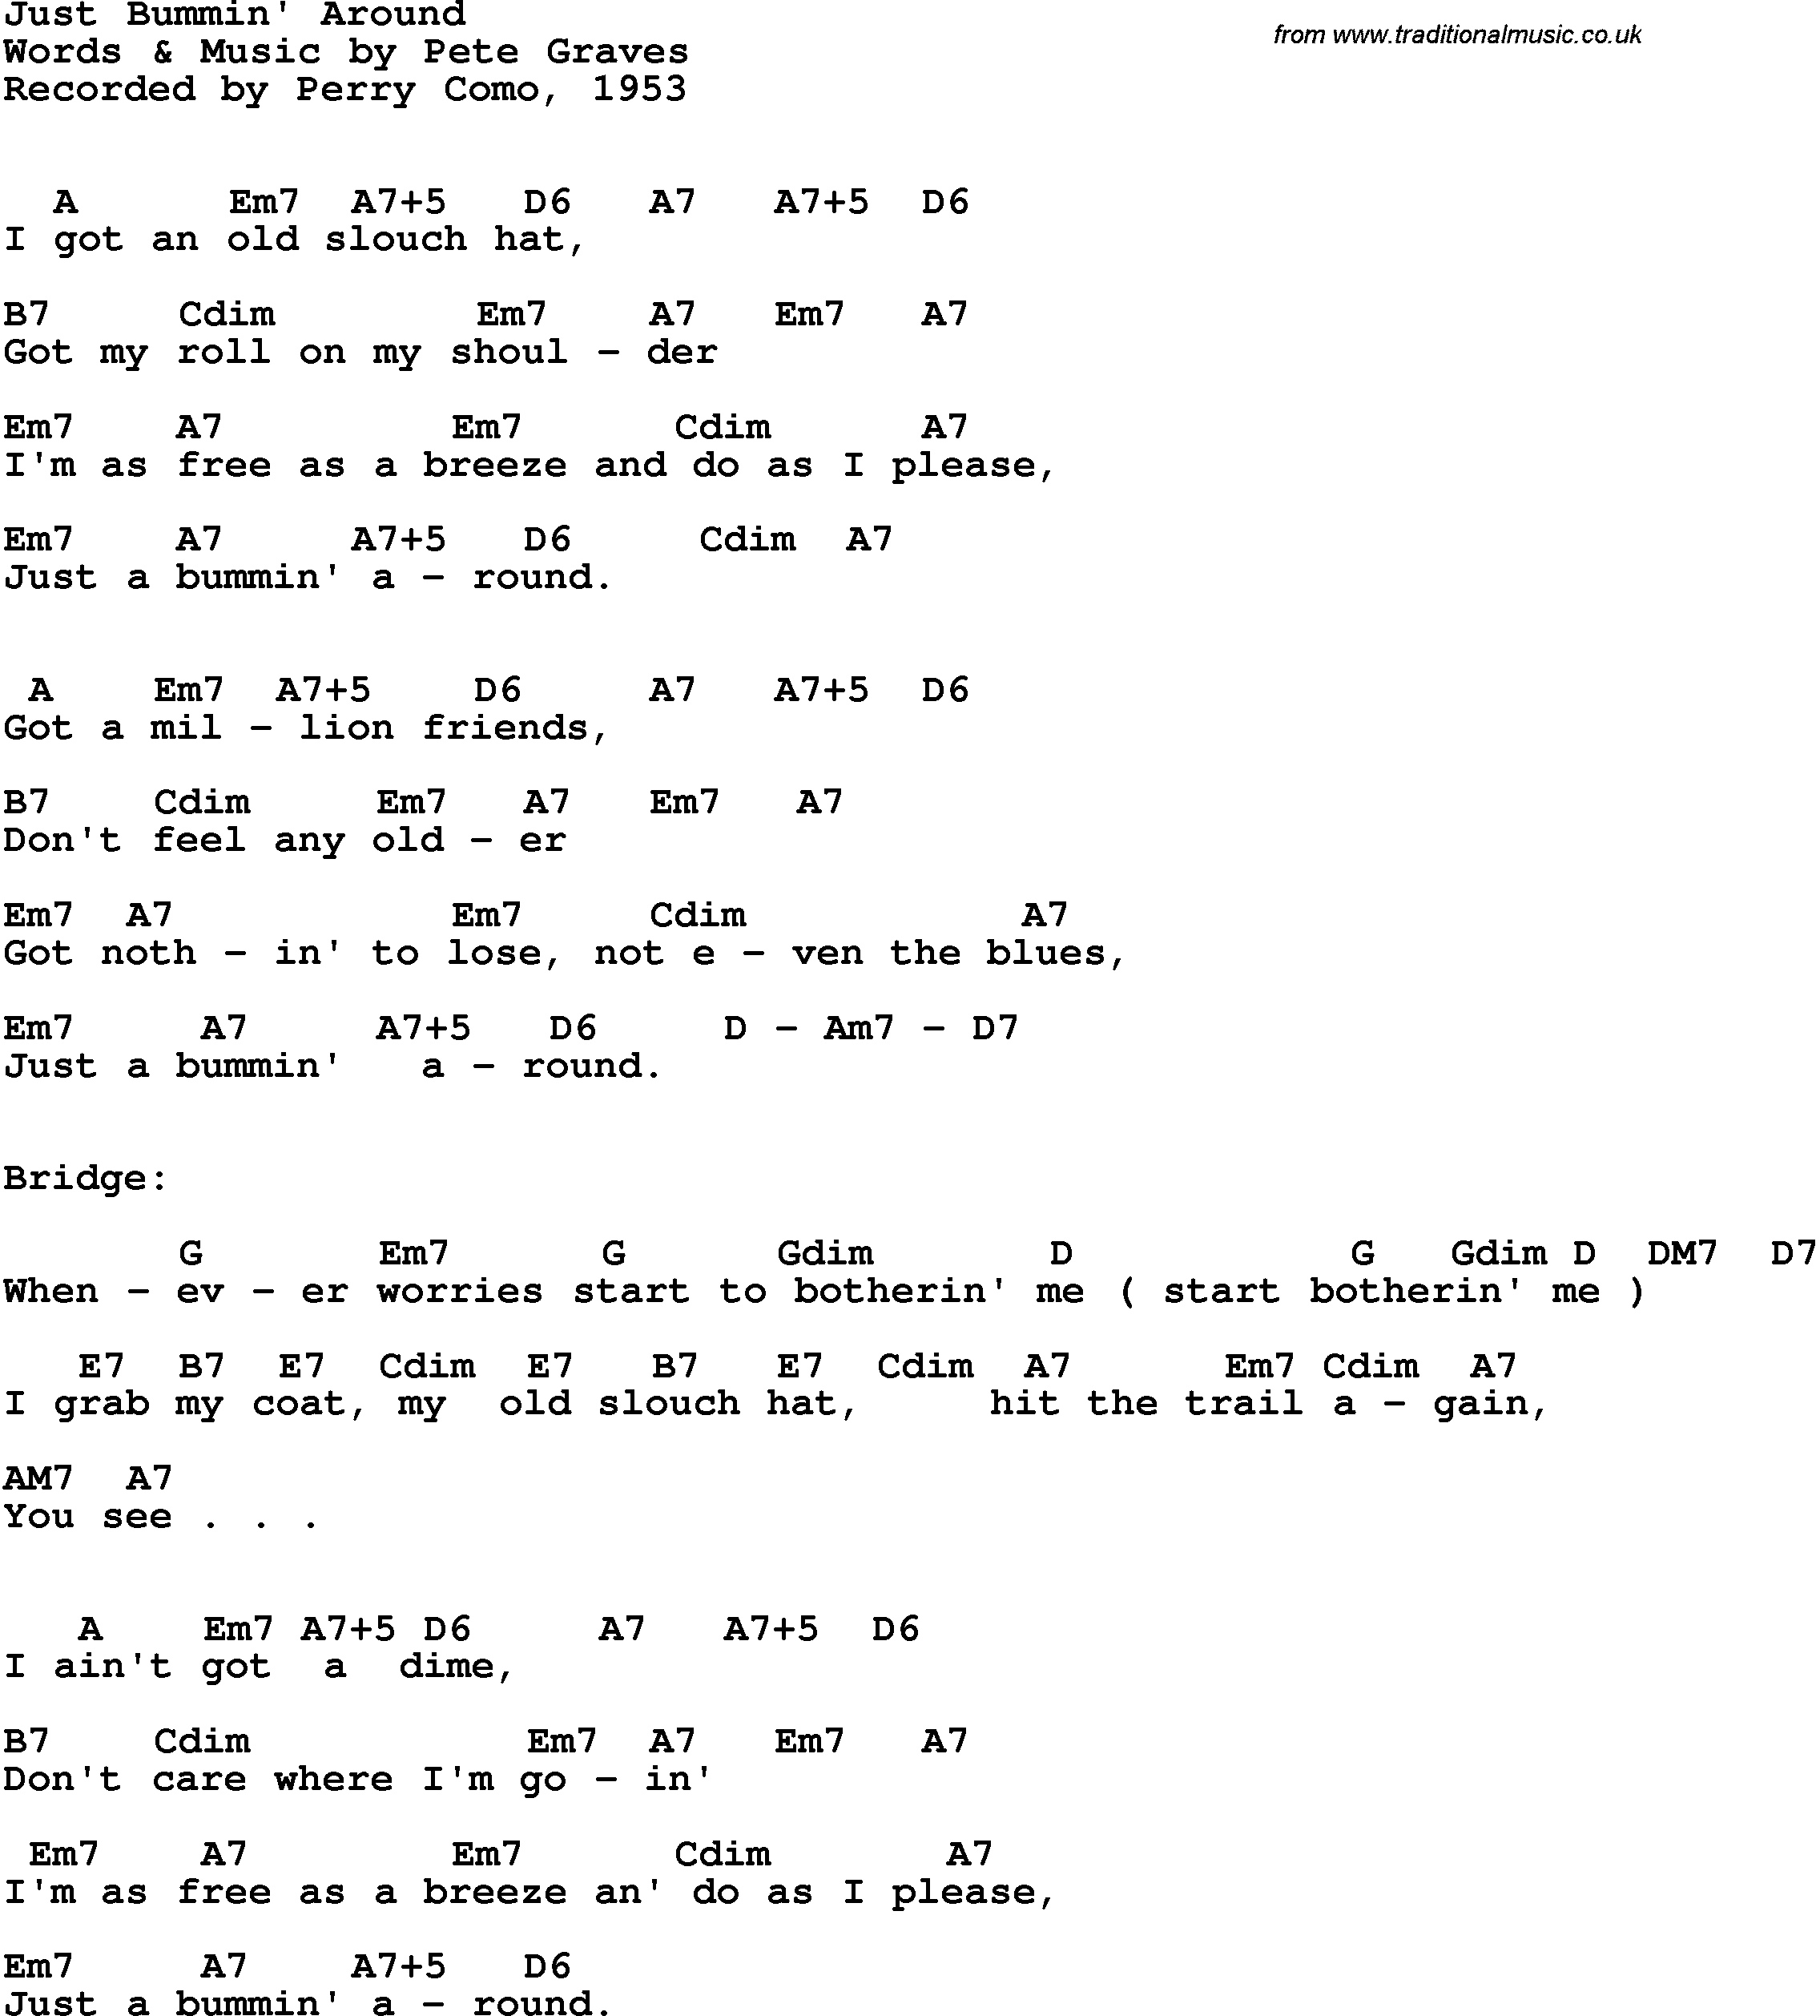 Song Lyrics with guitar chords for Just Bummin' Around - Perry Como, 1953